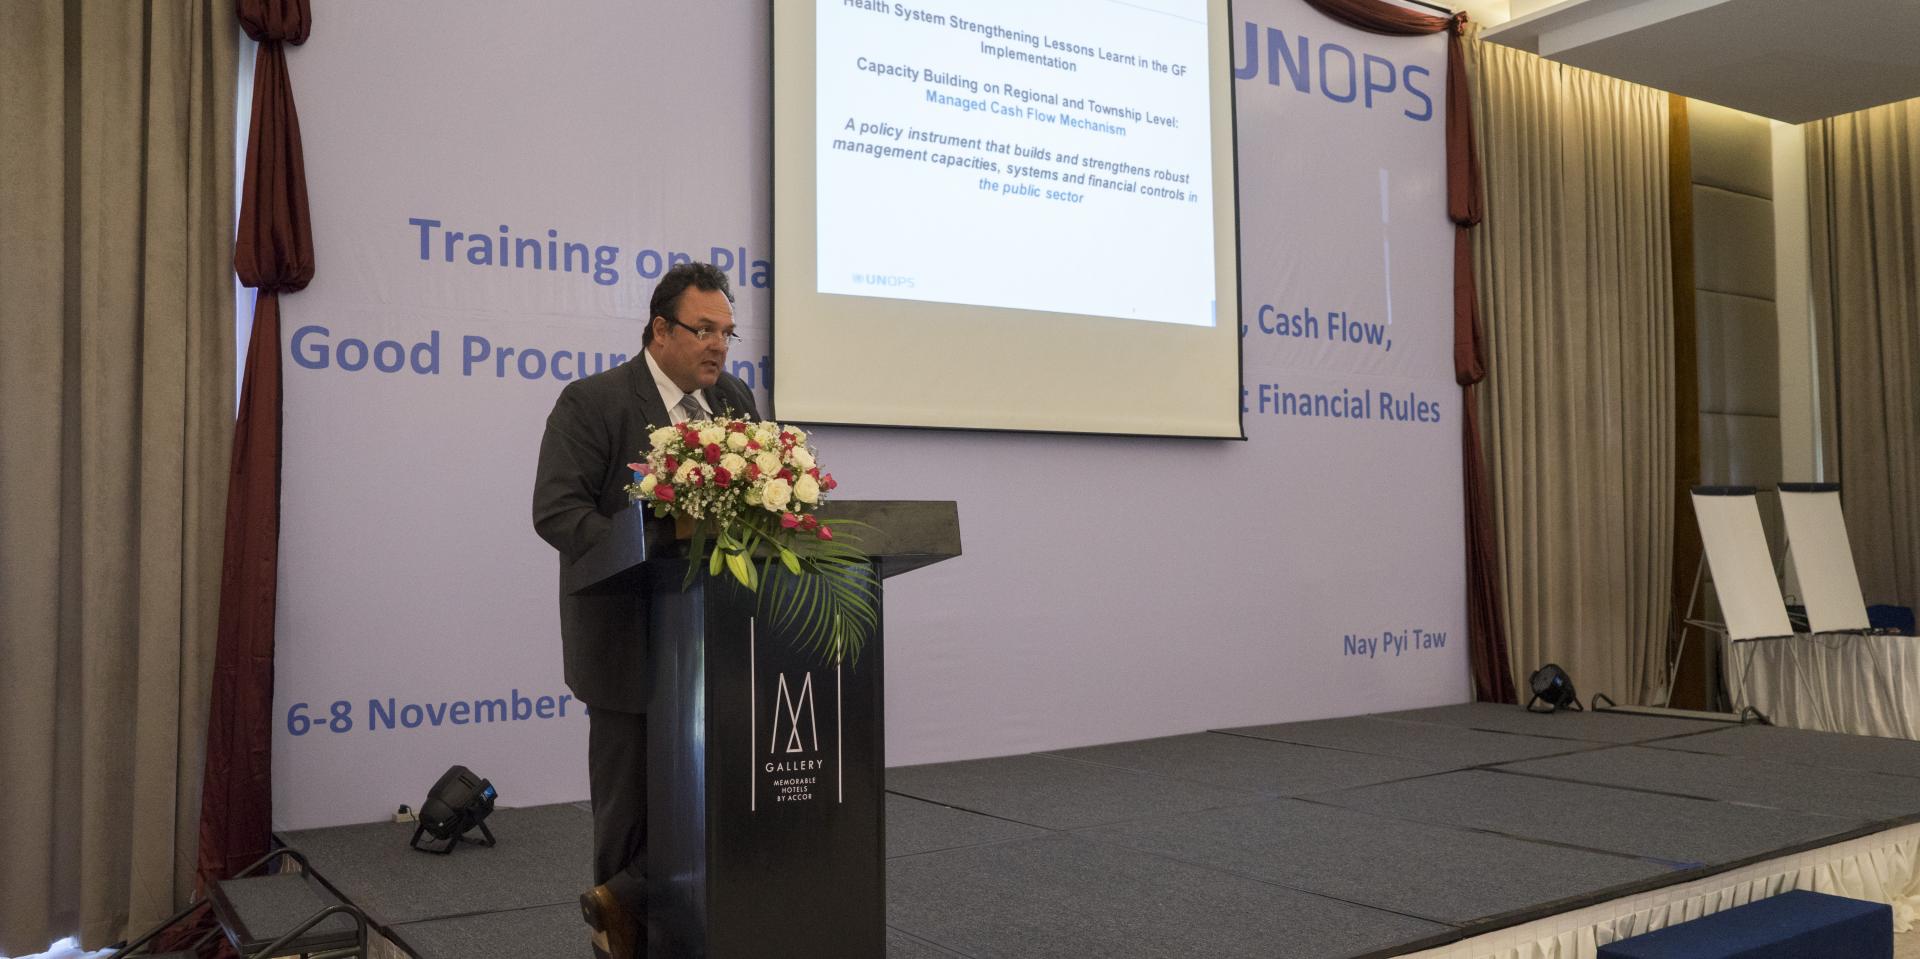 Dr Attila Molnar, Programme Director, PR-UNOPS, makes a brief presentation on ‘Planning and Budgeting as Health System Strengthening’ for the third batch of training on ‘Planning, Budgeting, Controls, Cash Flow, Good Procurement Practices and Government Financial Rules’, Nay Pyi Taw, 6 November 2017.